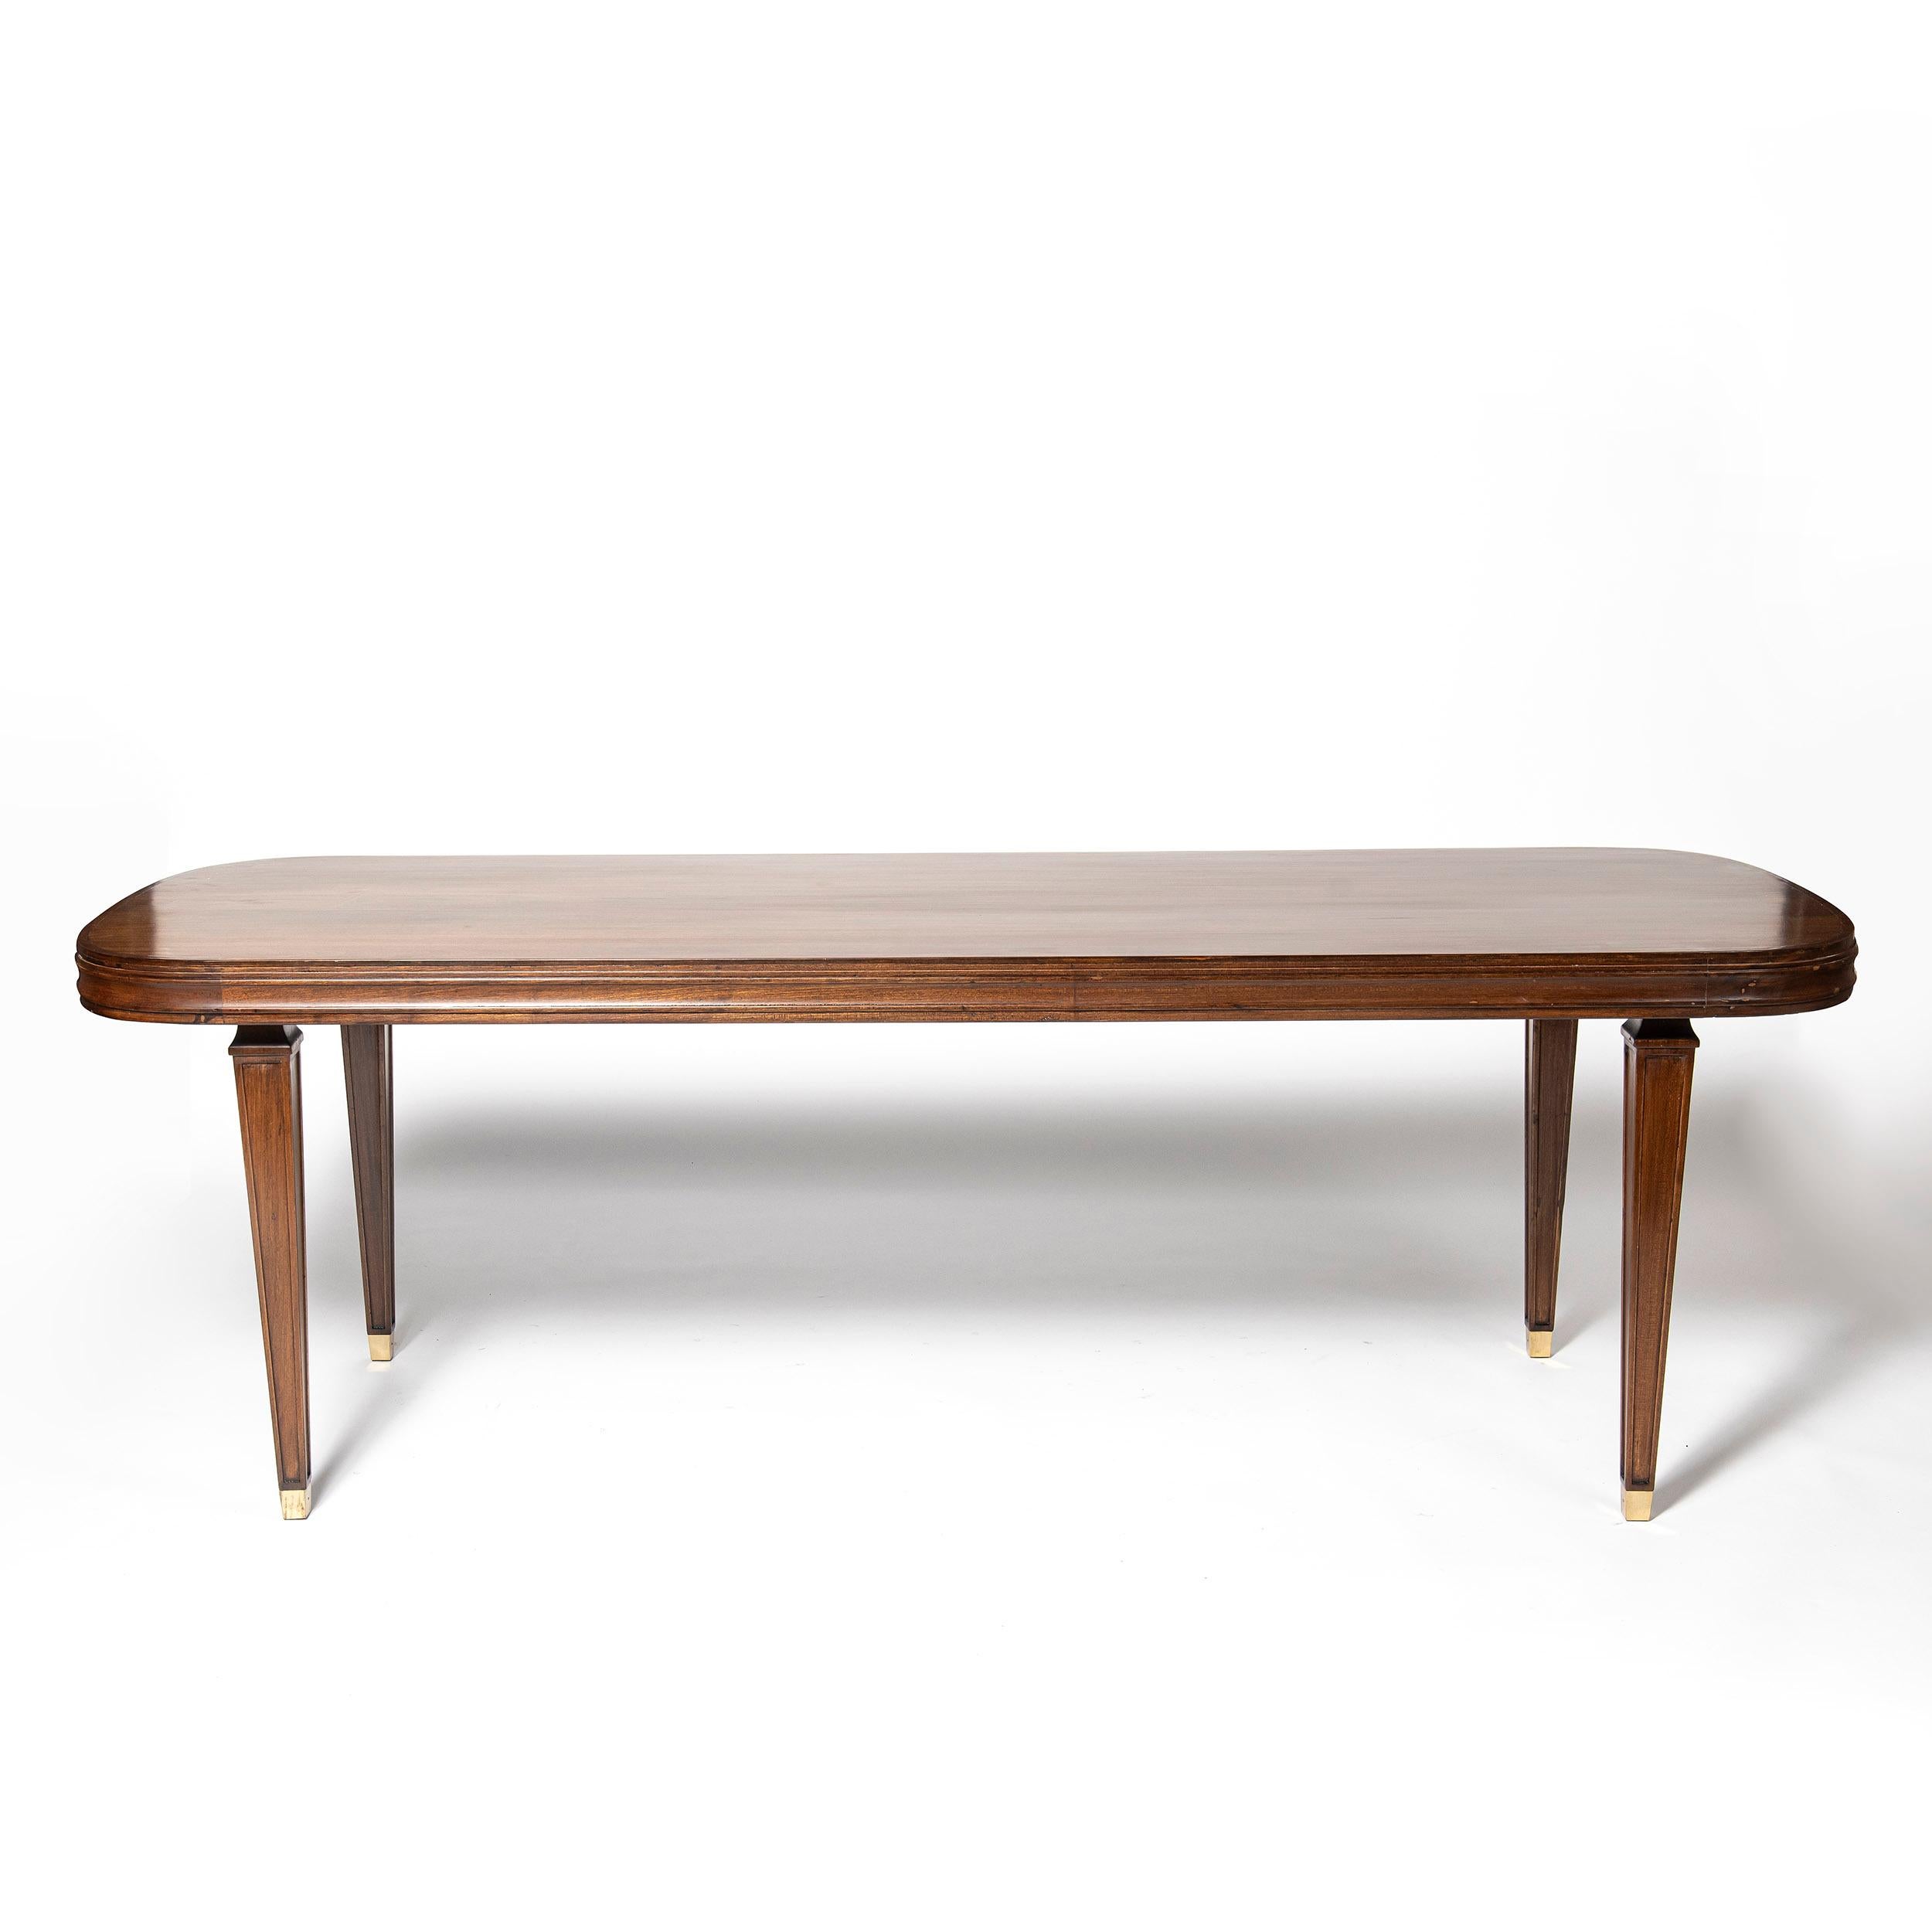 Wood and bronze center table by Comte, Argentina, Buenos Aires, circa 1940.